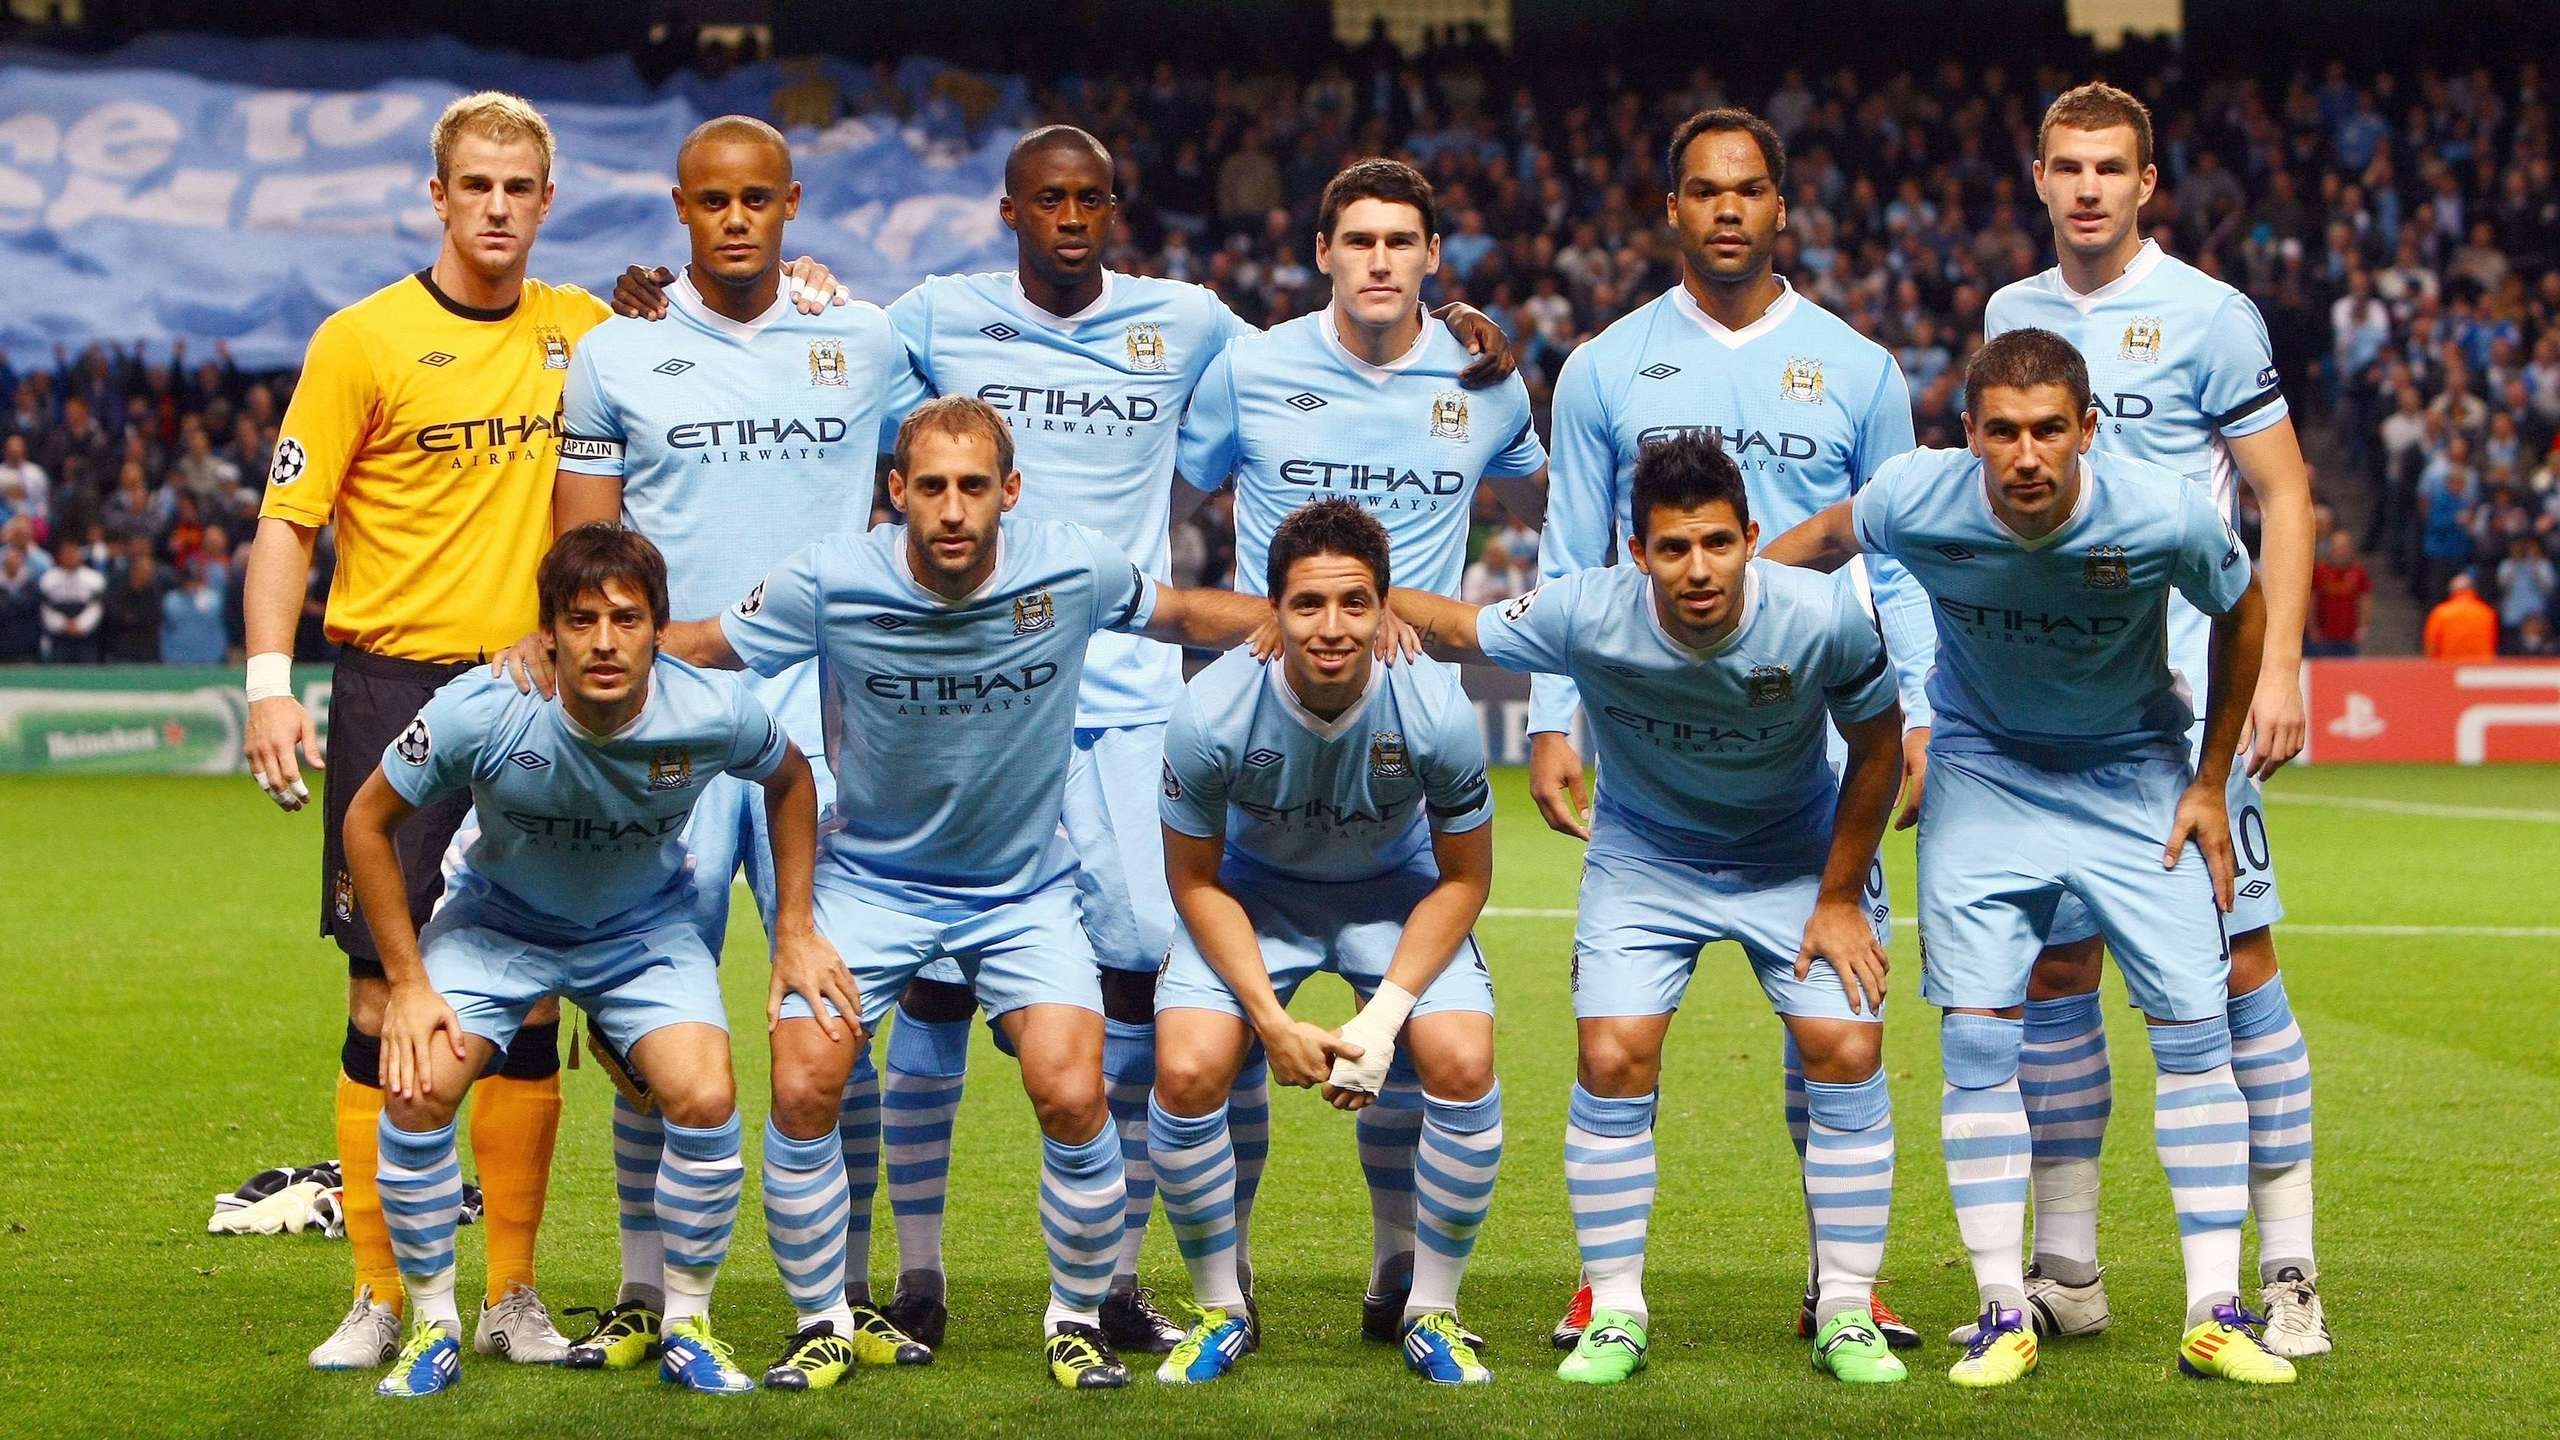 Man City Champions League for 2560x1440 HDTV resolution